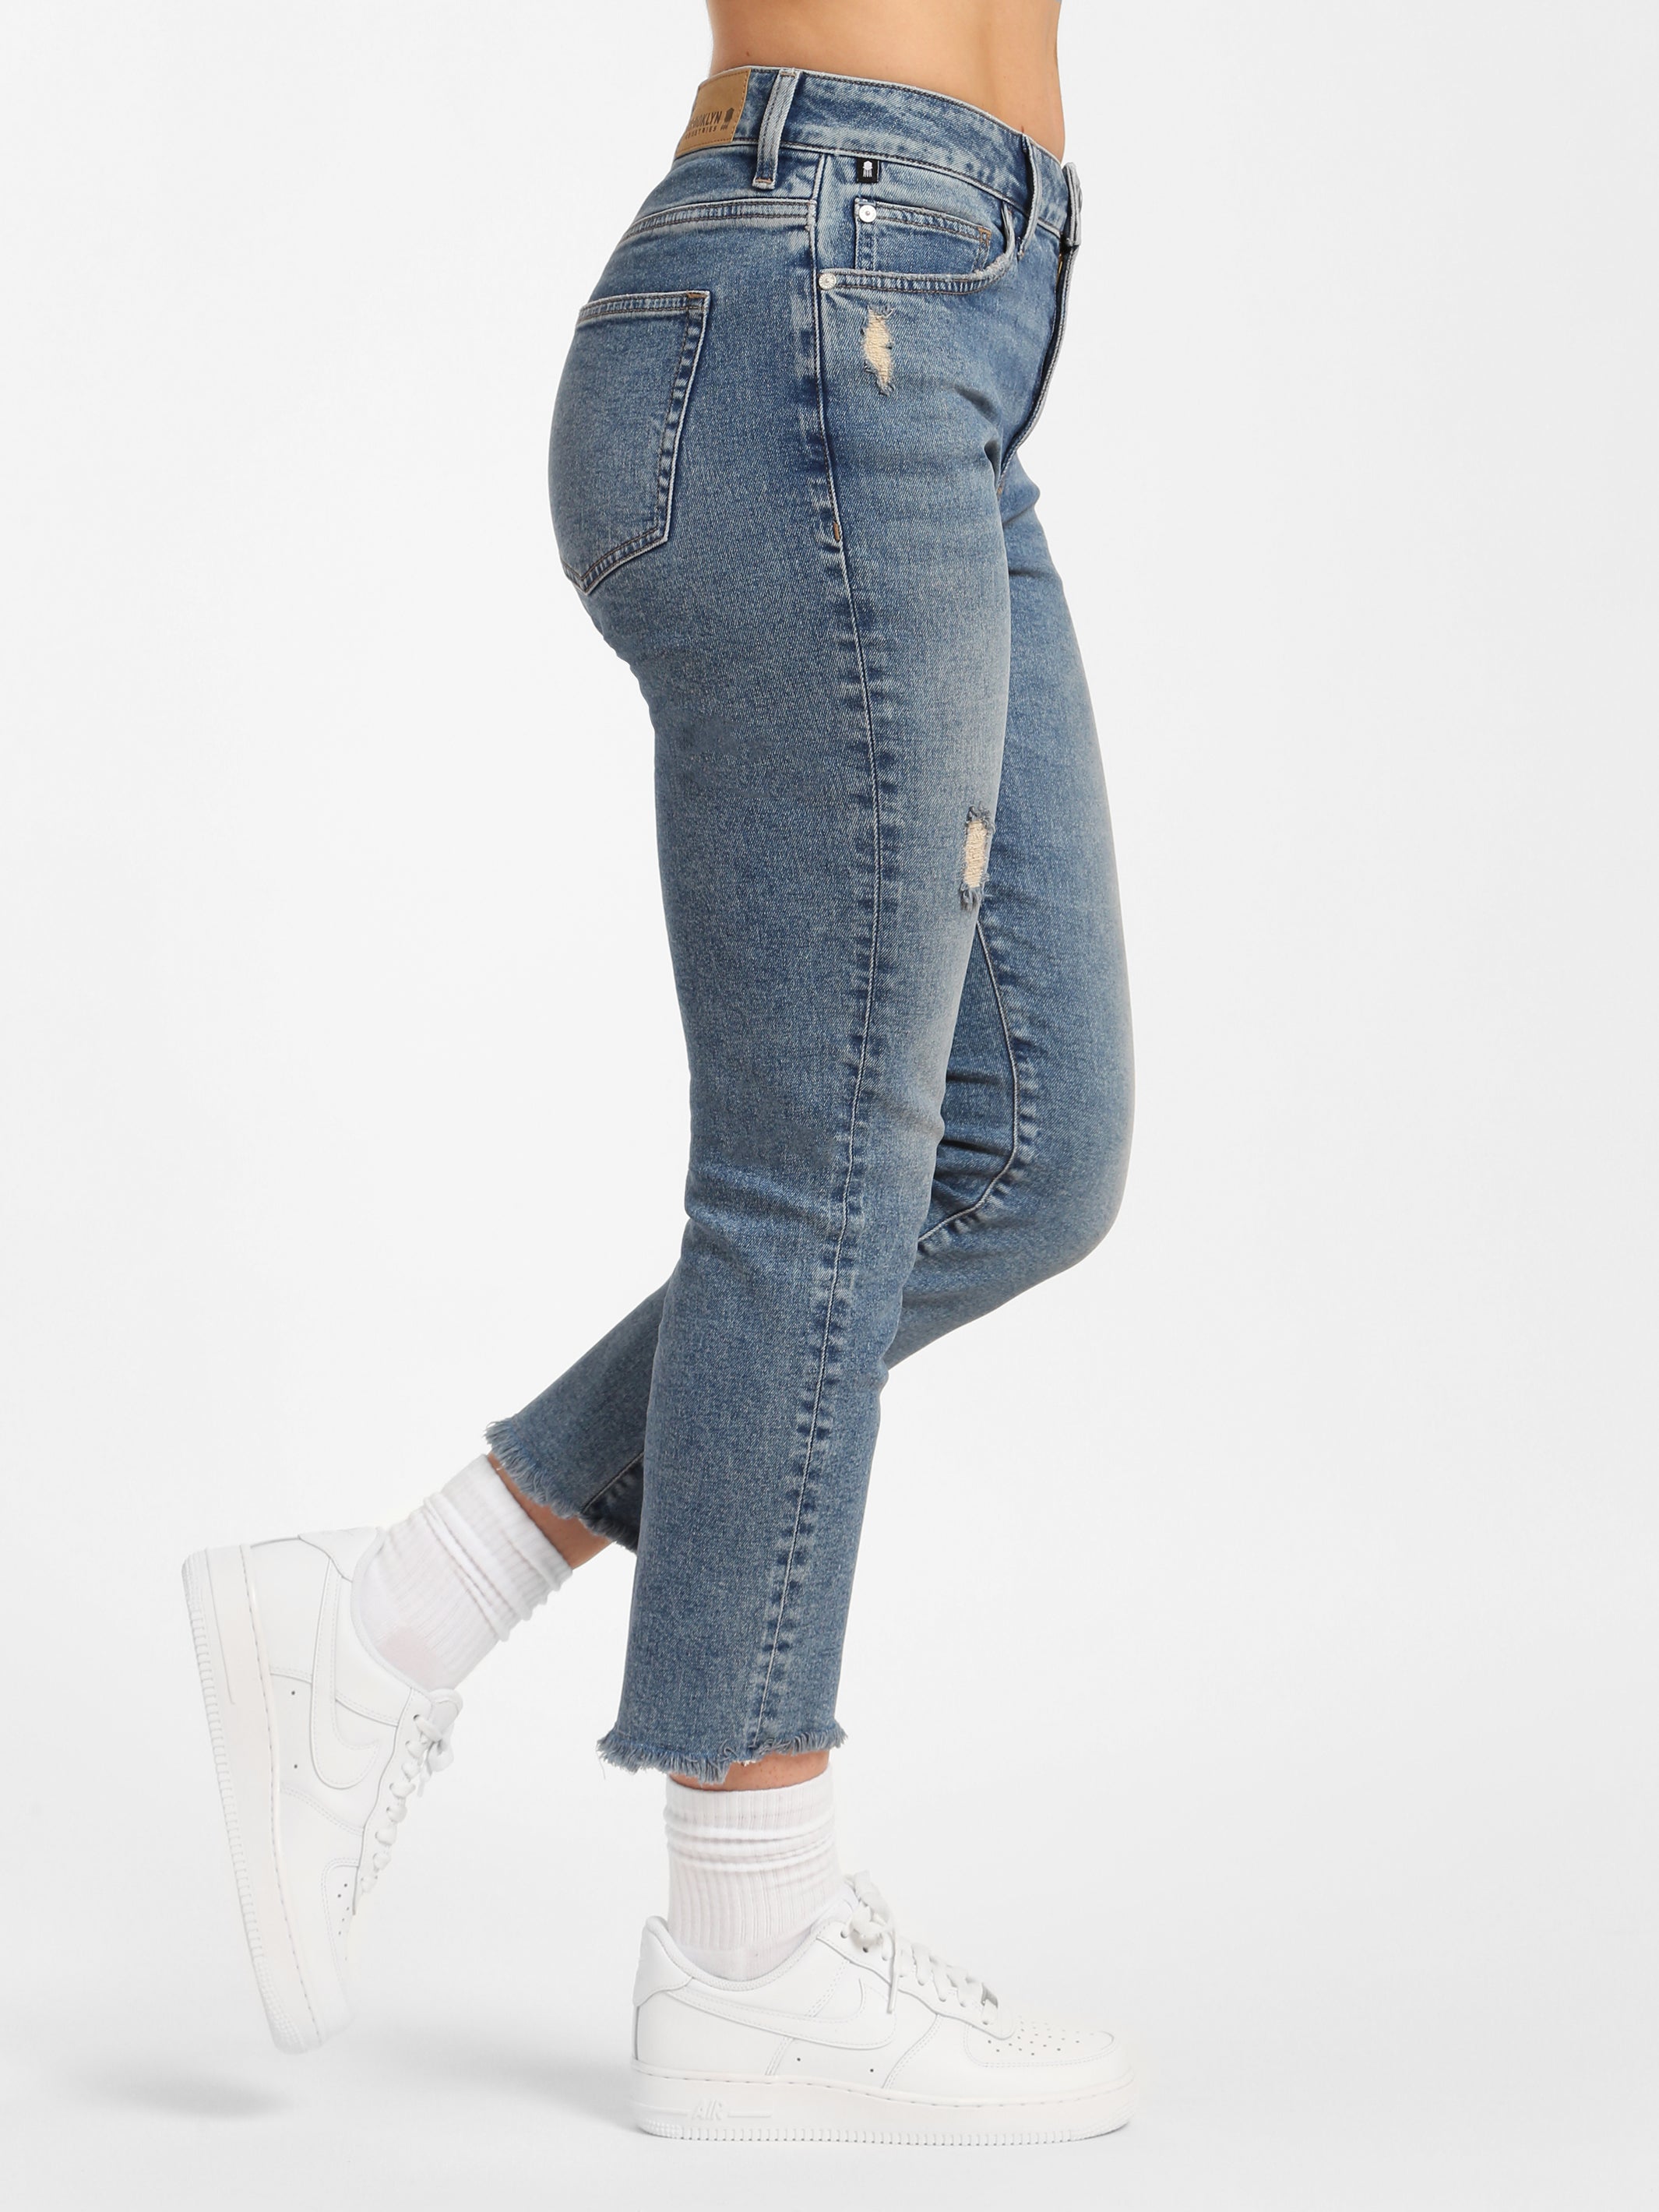 CBGELRT Trendy Jeans for Women High Waist Female Summer Pants Women Women's  High Waisted Ripped Jeans for Women Lift Distressed Stretch Skinny Jeans -  Walmart.com